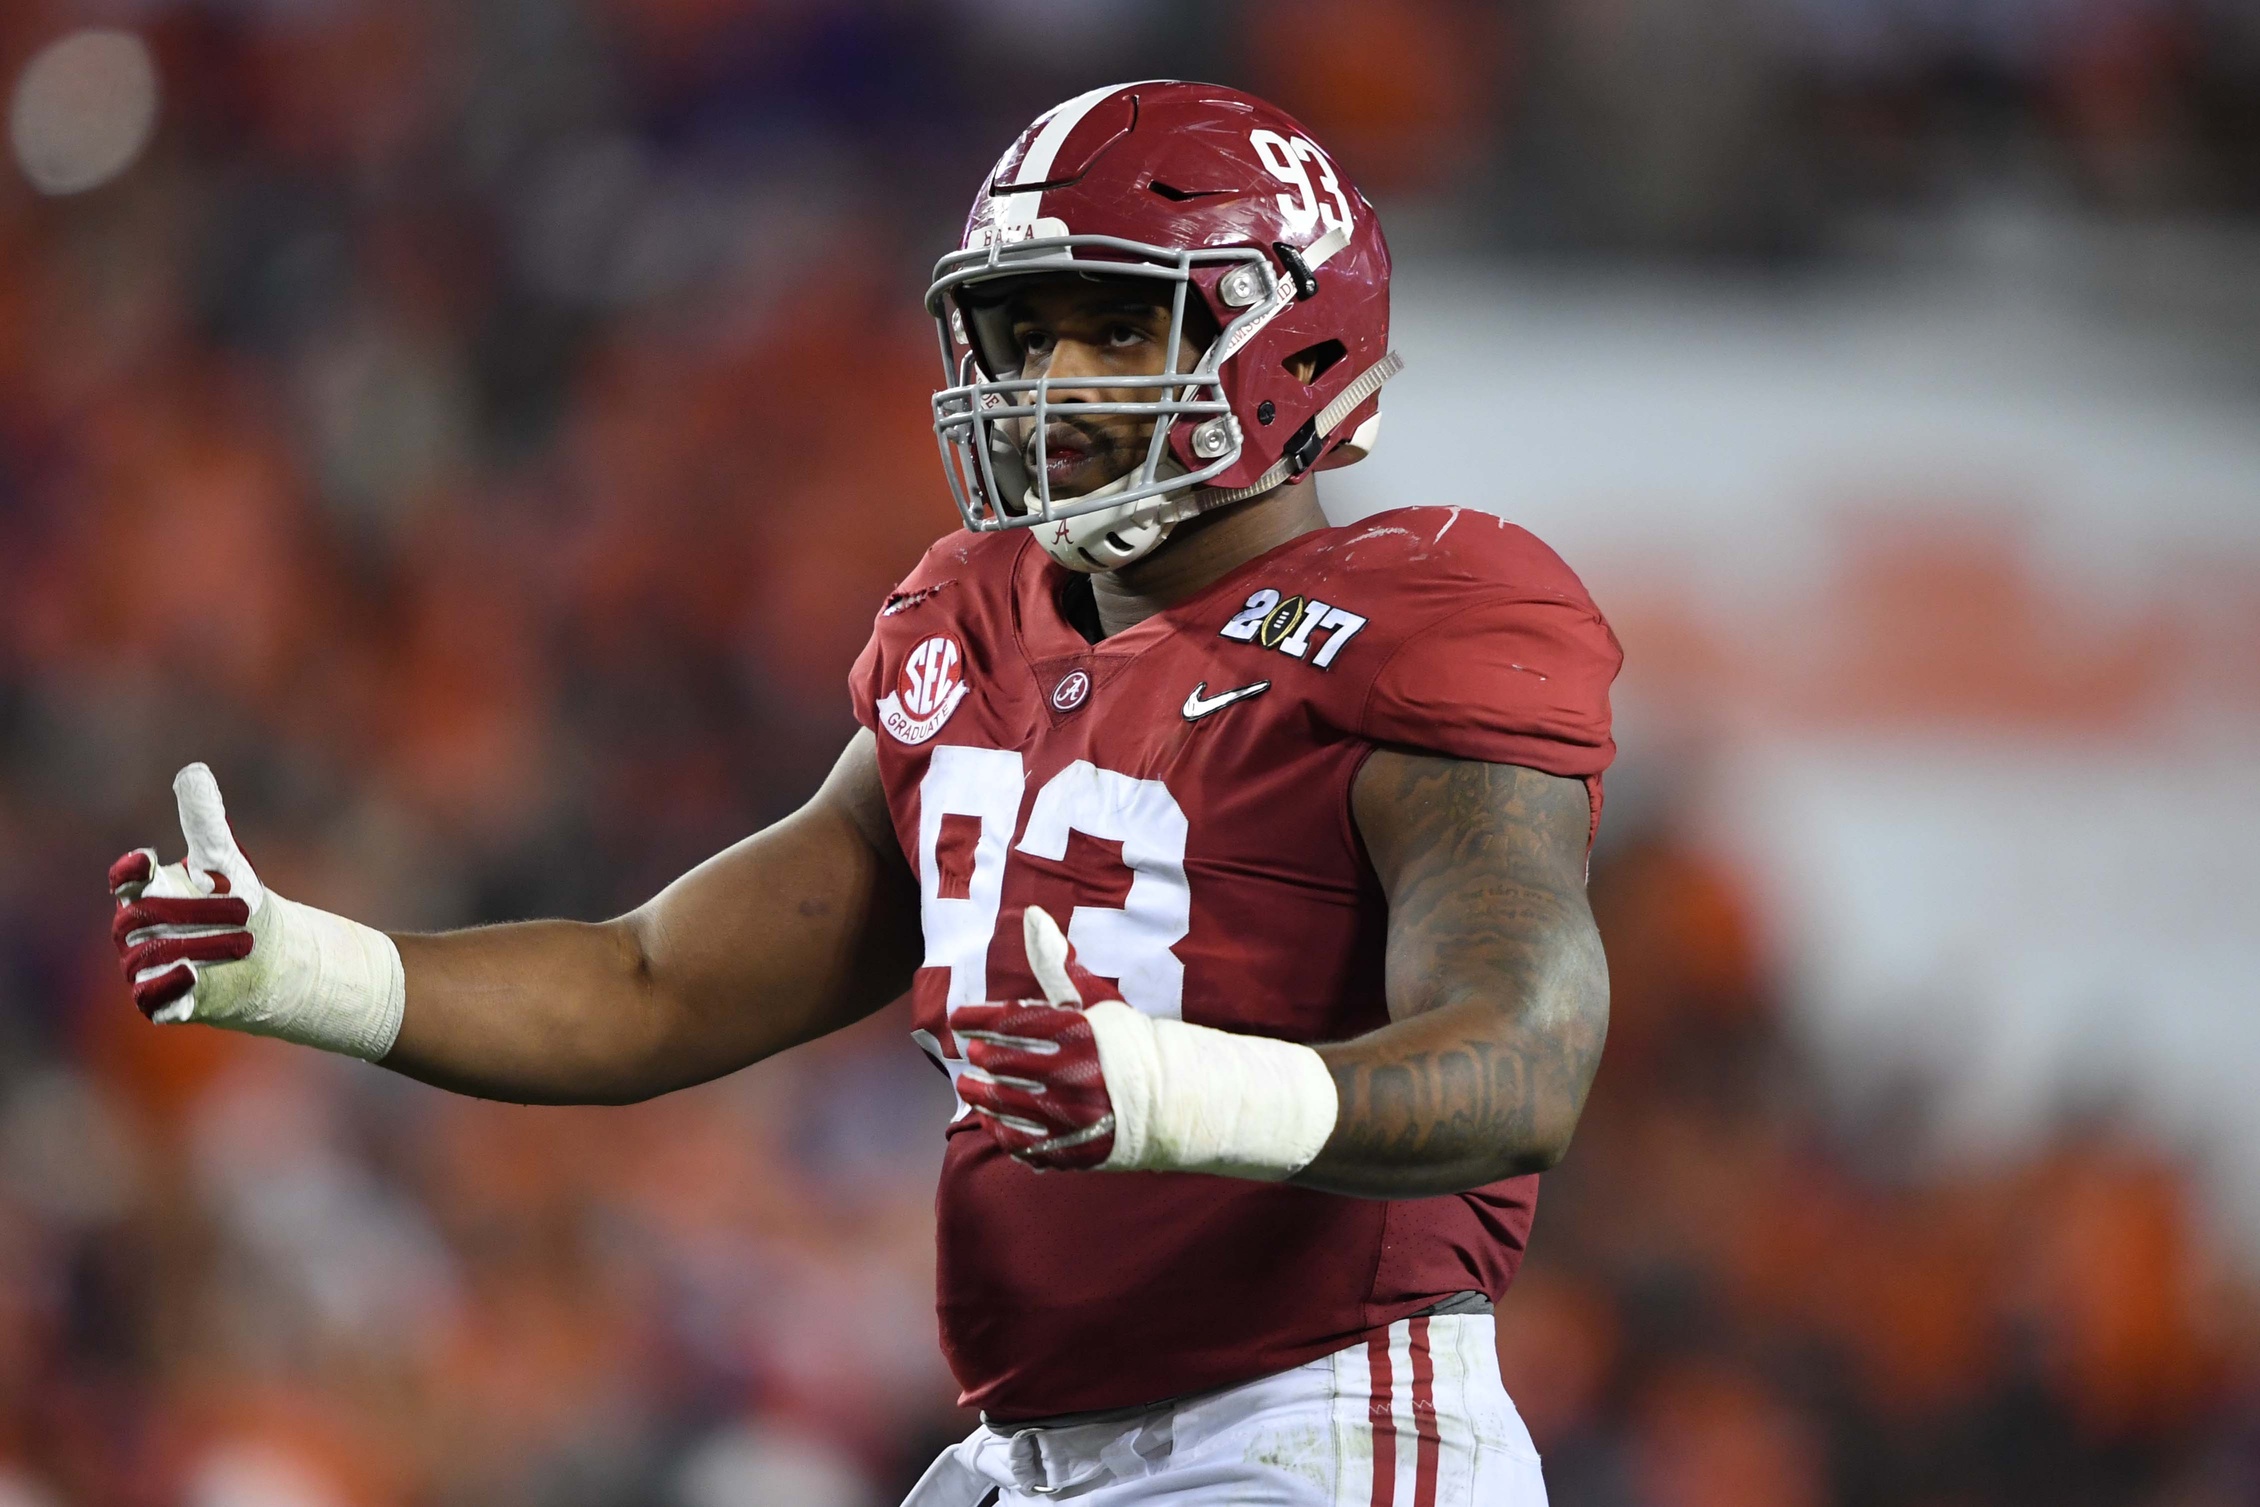 Jan 9, 2017; Tampa, FL, USA; Alabama Crimson Tide defensive lineman Jonathan Allen (93) reacts during the second quarter against the Clemson Tigers in the 2017 College Football Playoff National Championship Game at Raymond James Stadium. Mandatory Credit: John David Mercer-USA TODAY Sports